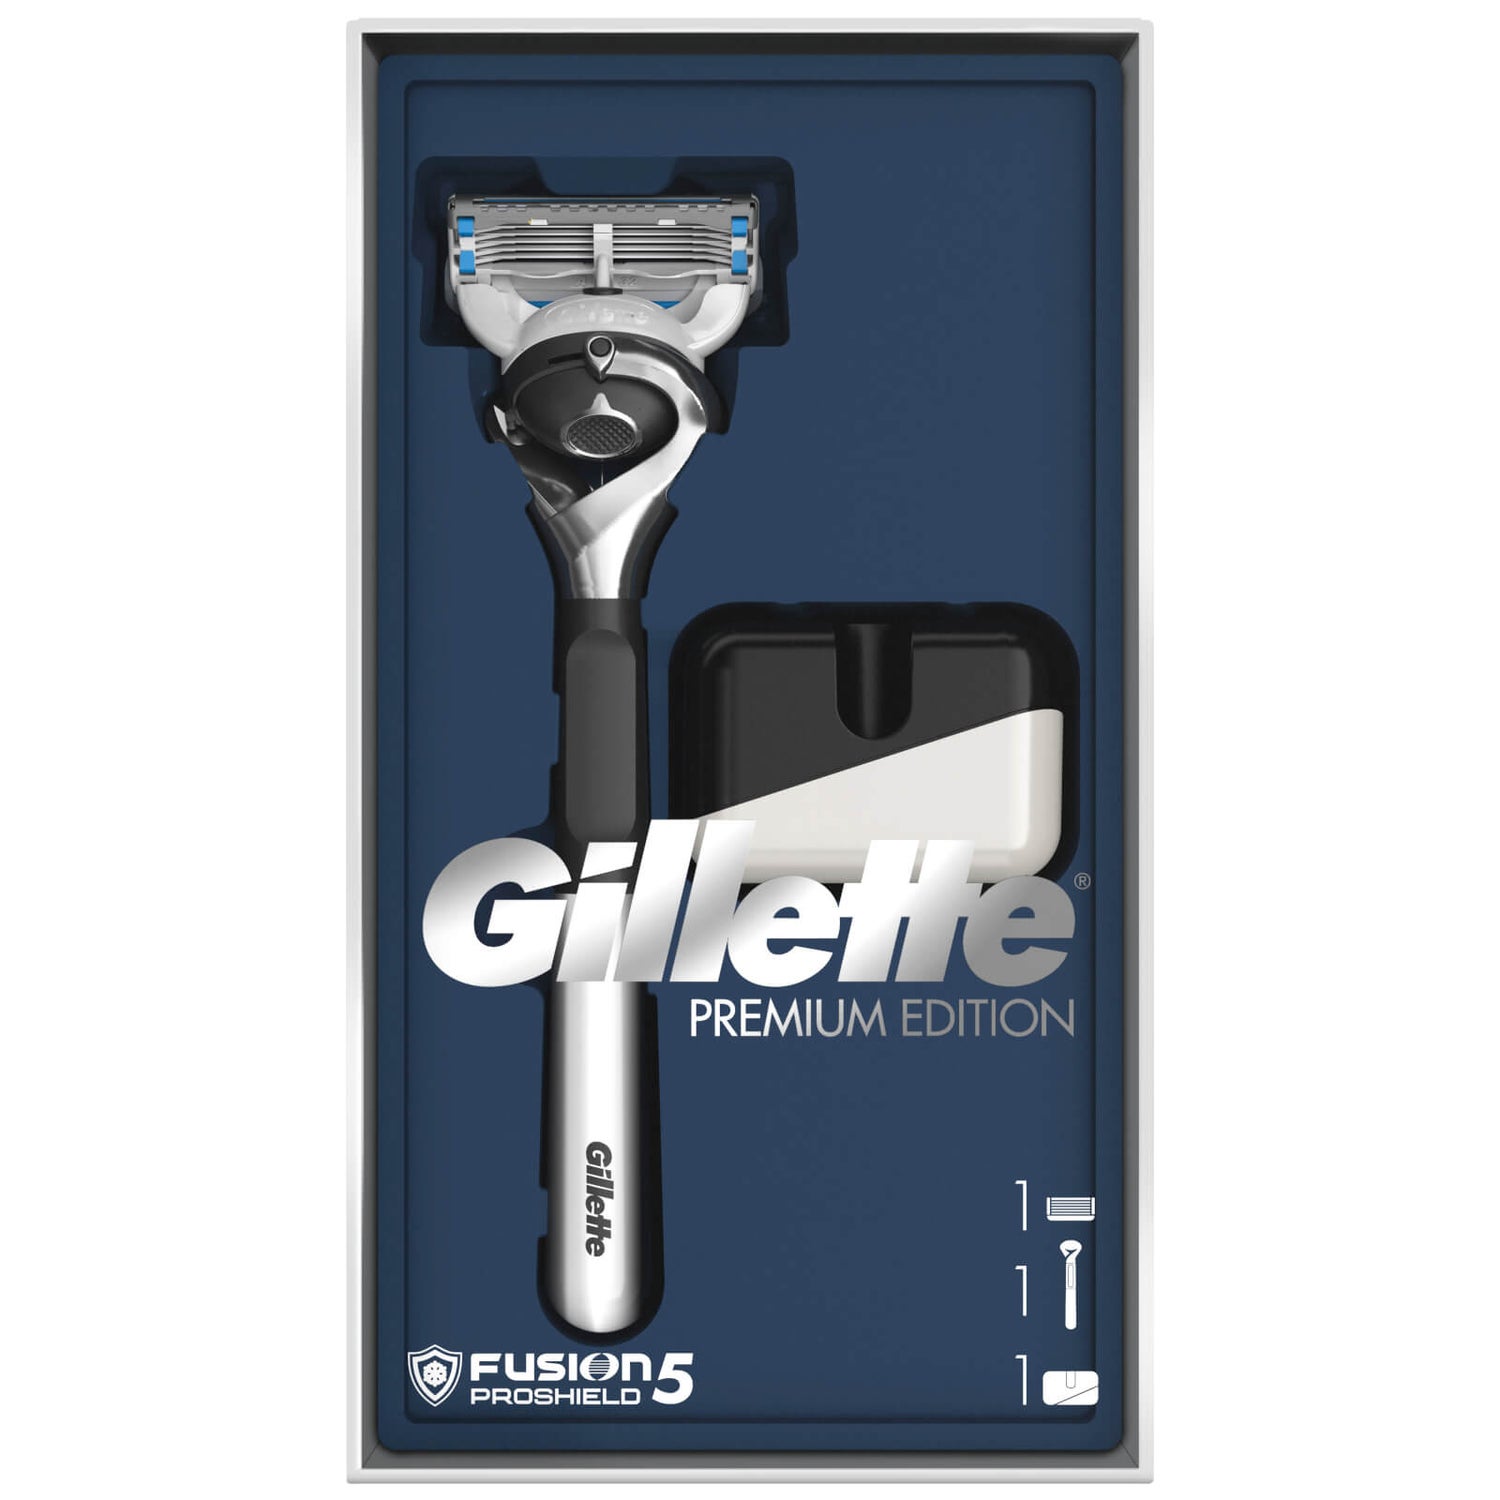 Special Edition Fusion5 ProShield Gift Set | Gillette UK